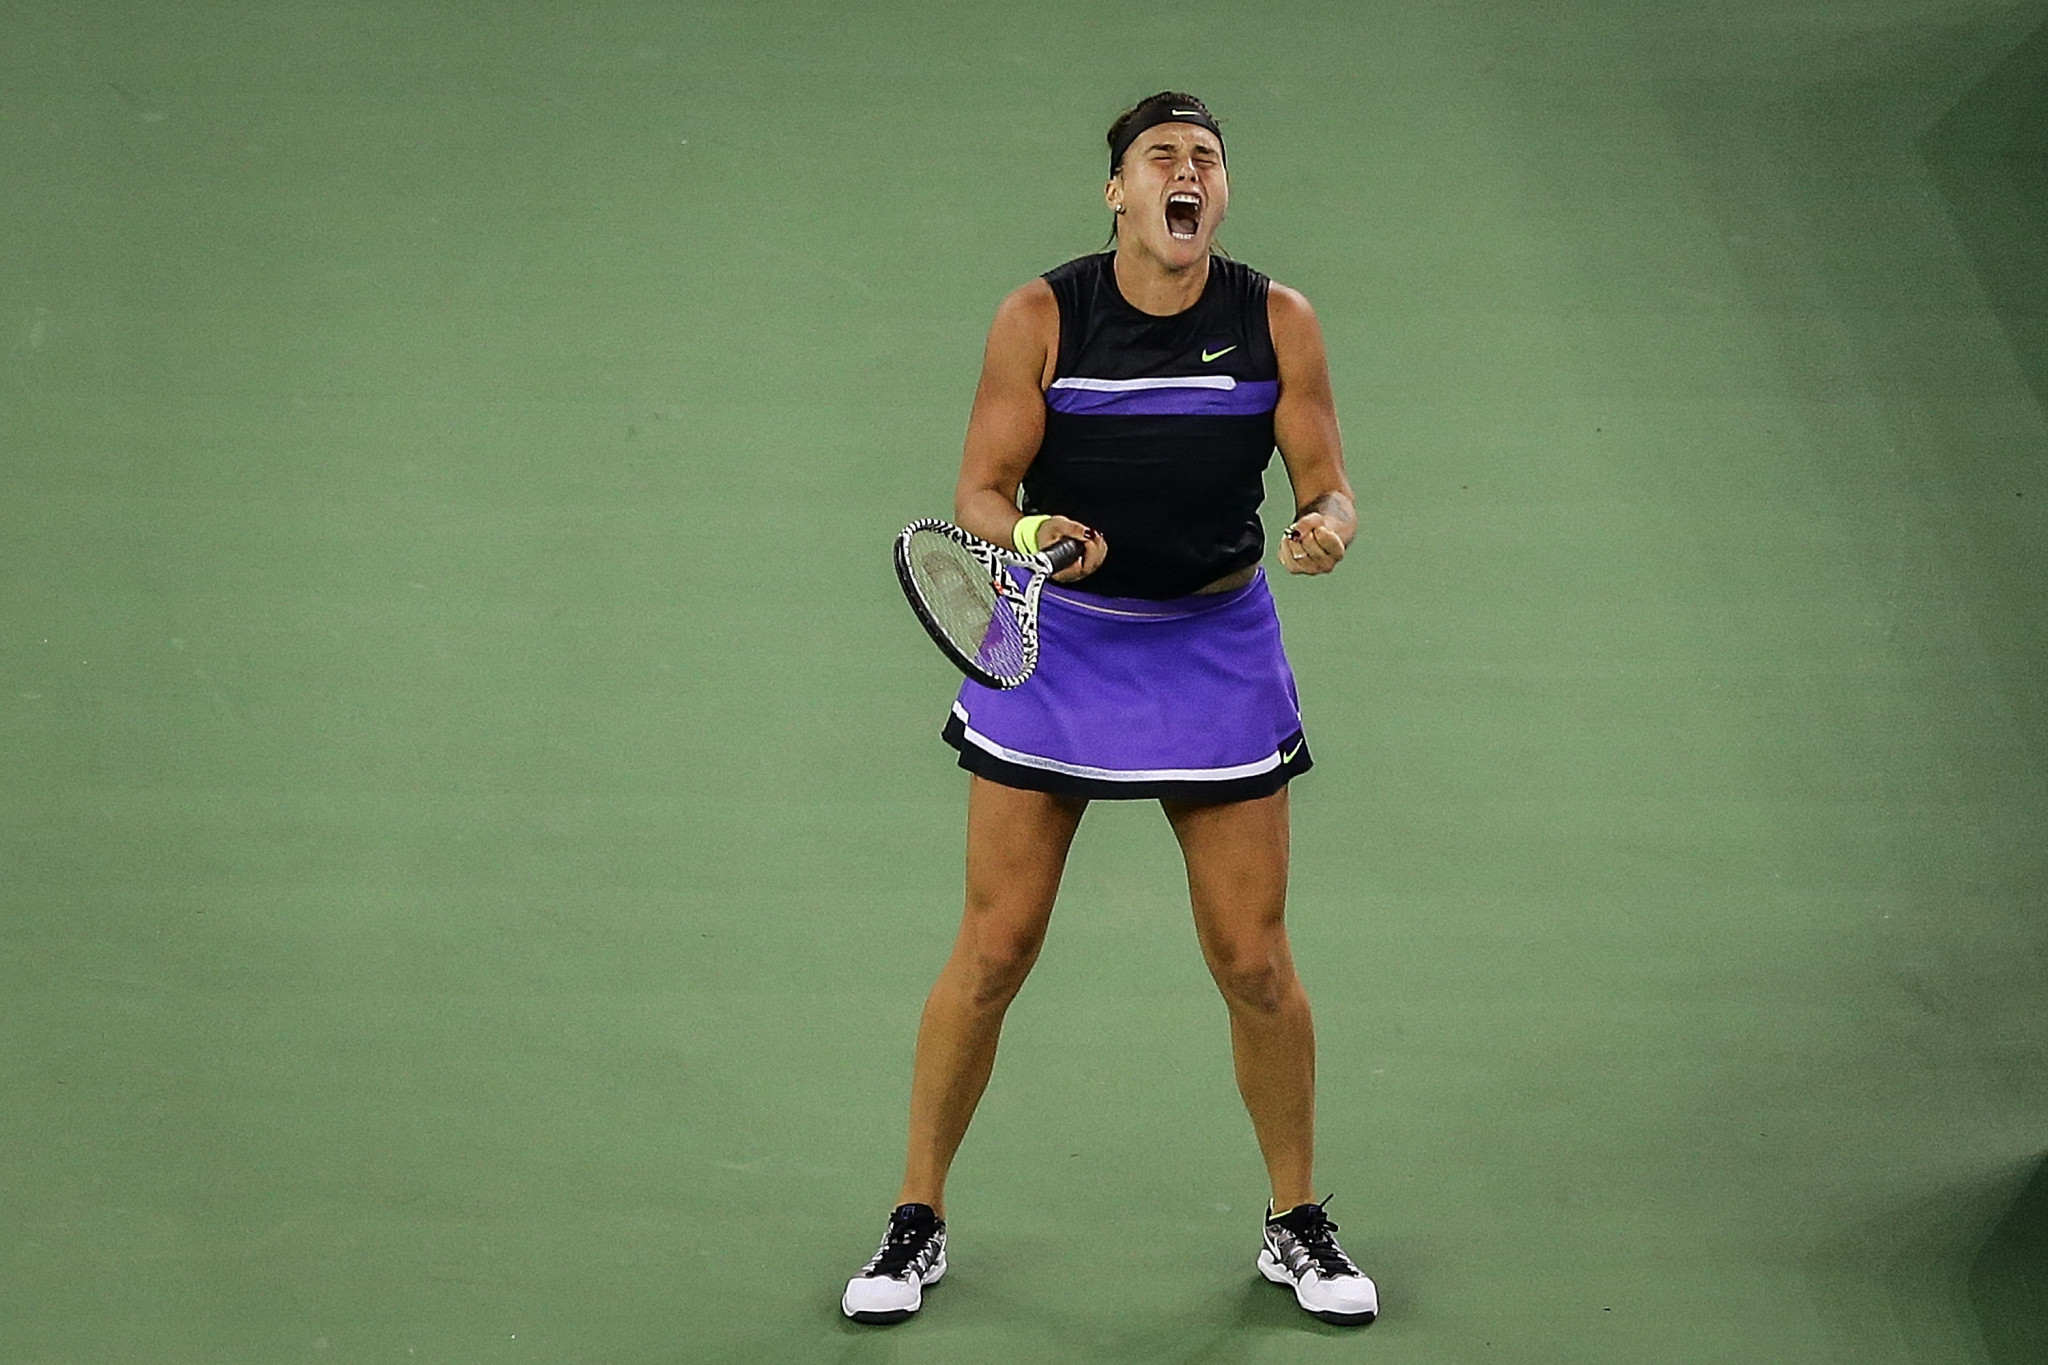 Reigning champion beats world number one to reach Wuhan Open final